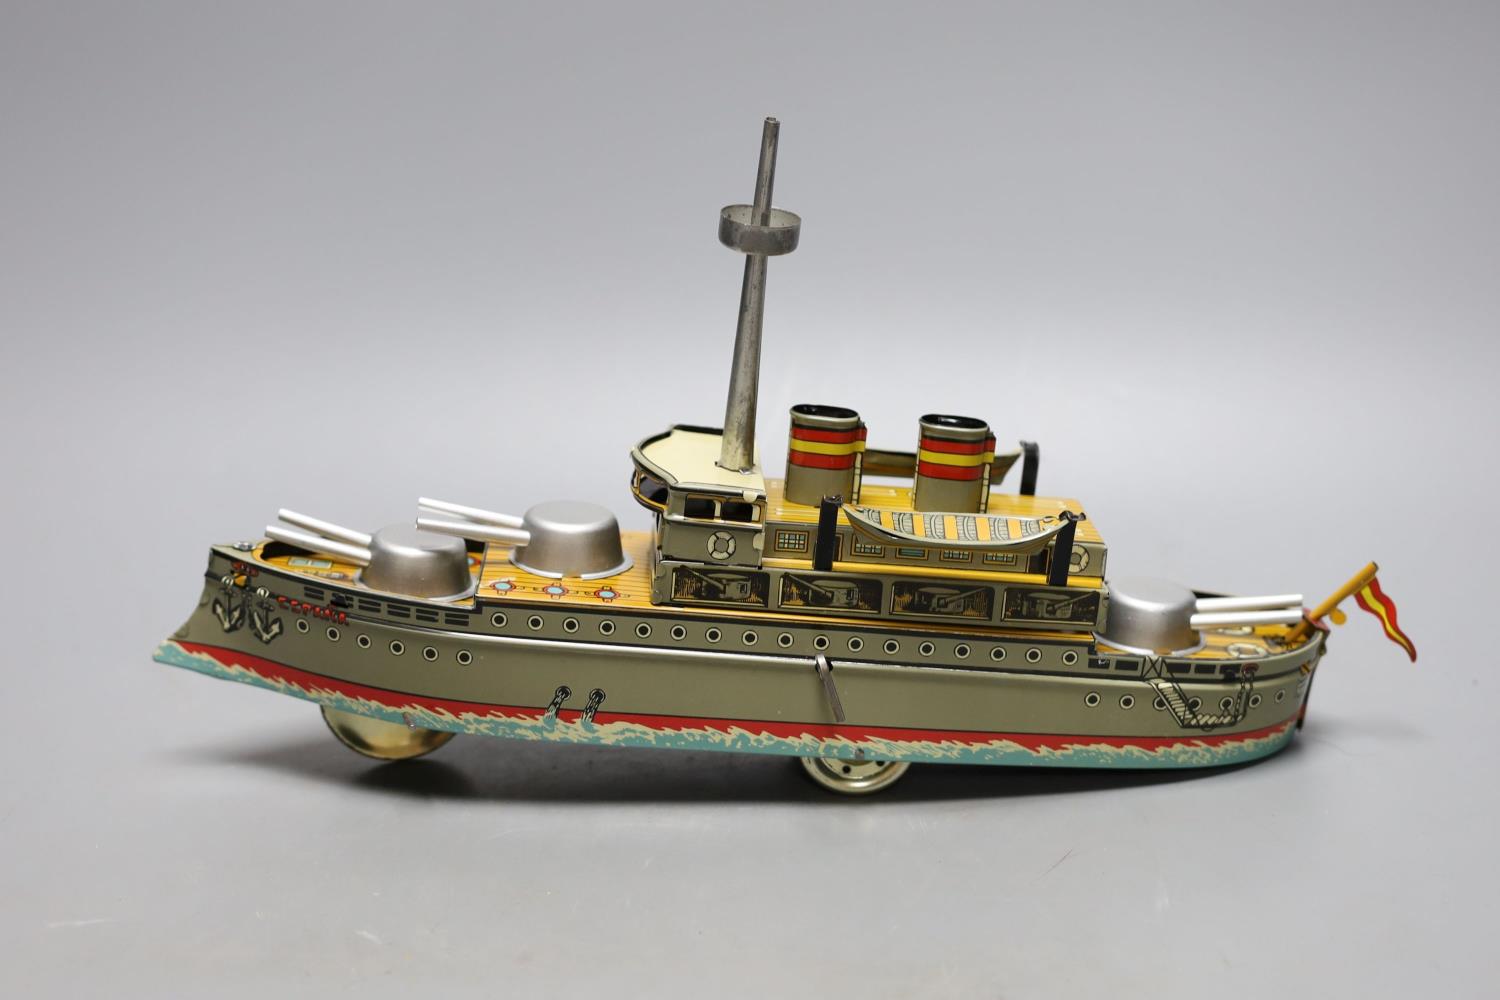 Three IBA tinplate boxed toys, two boats and a train,largest boat 42 cms wide.